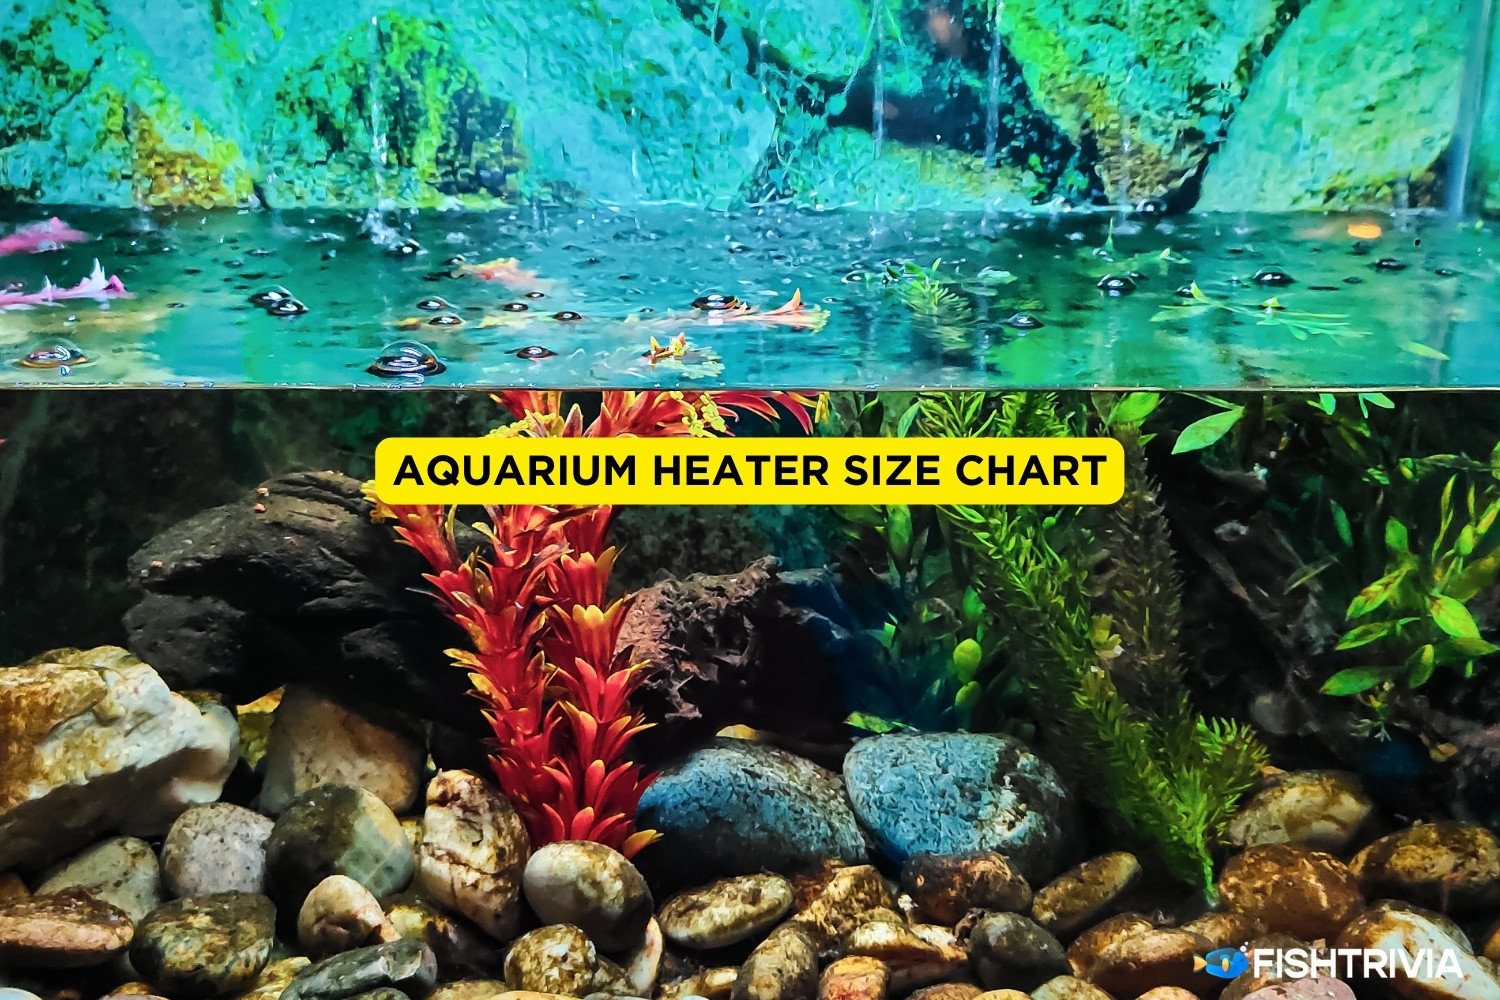 Aquarium Heater Size: What Size Heater Do You Need?